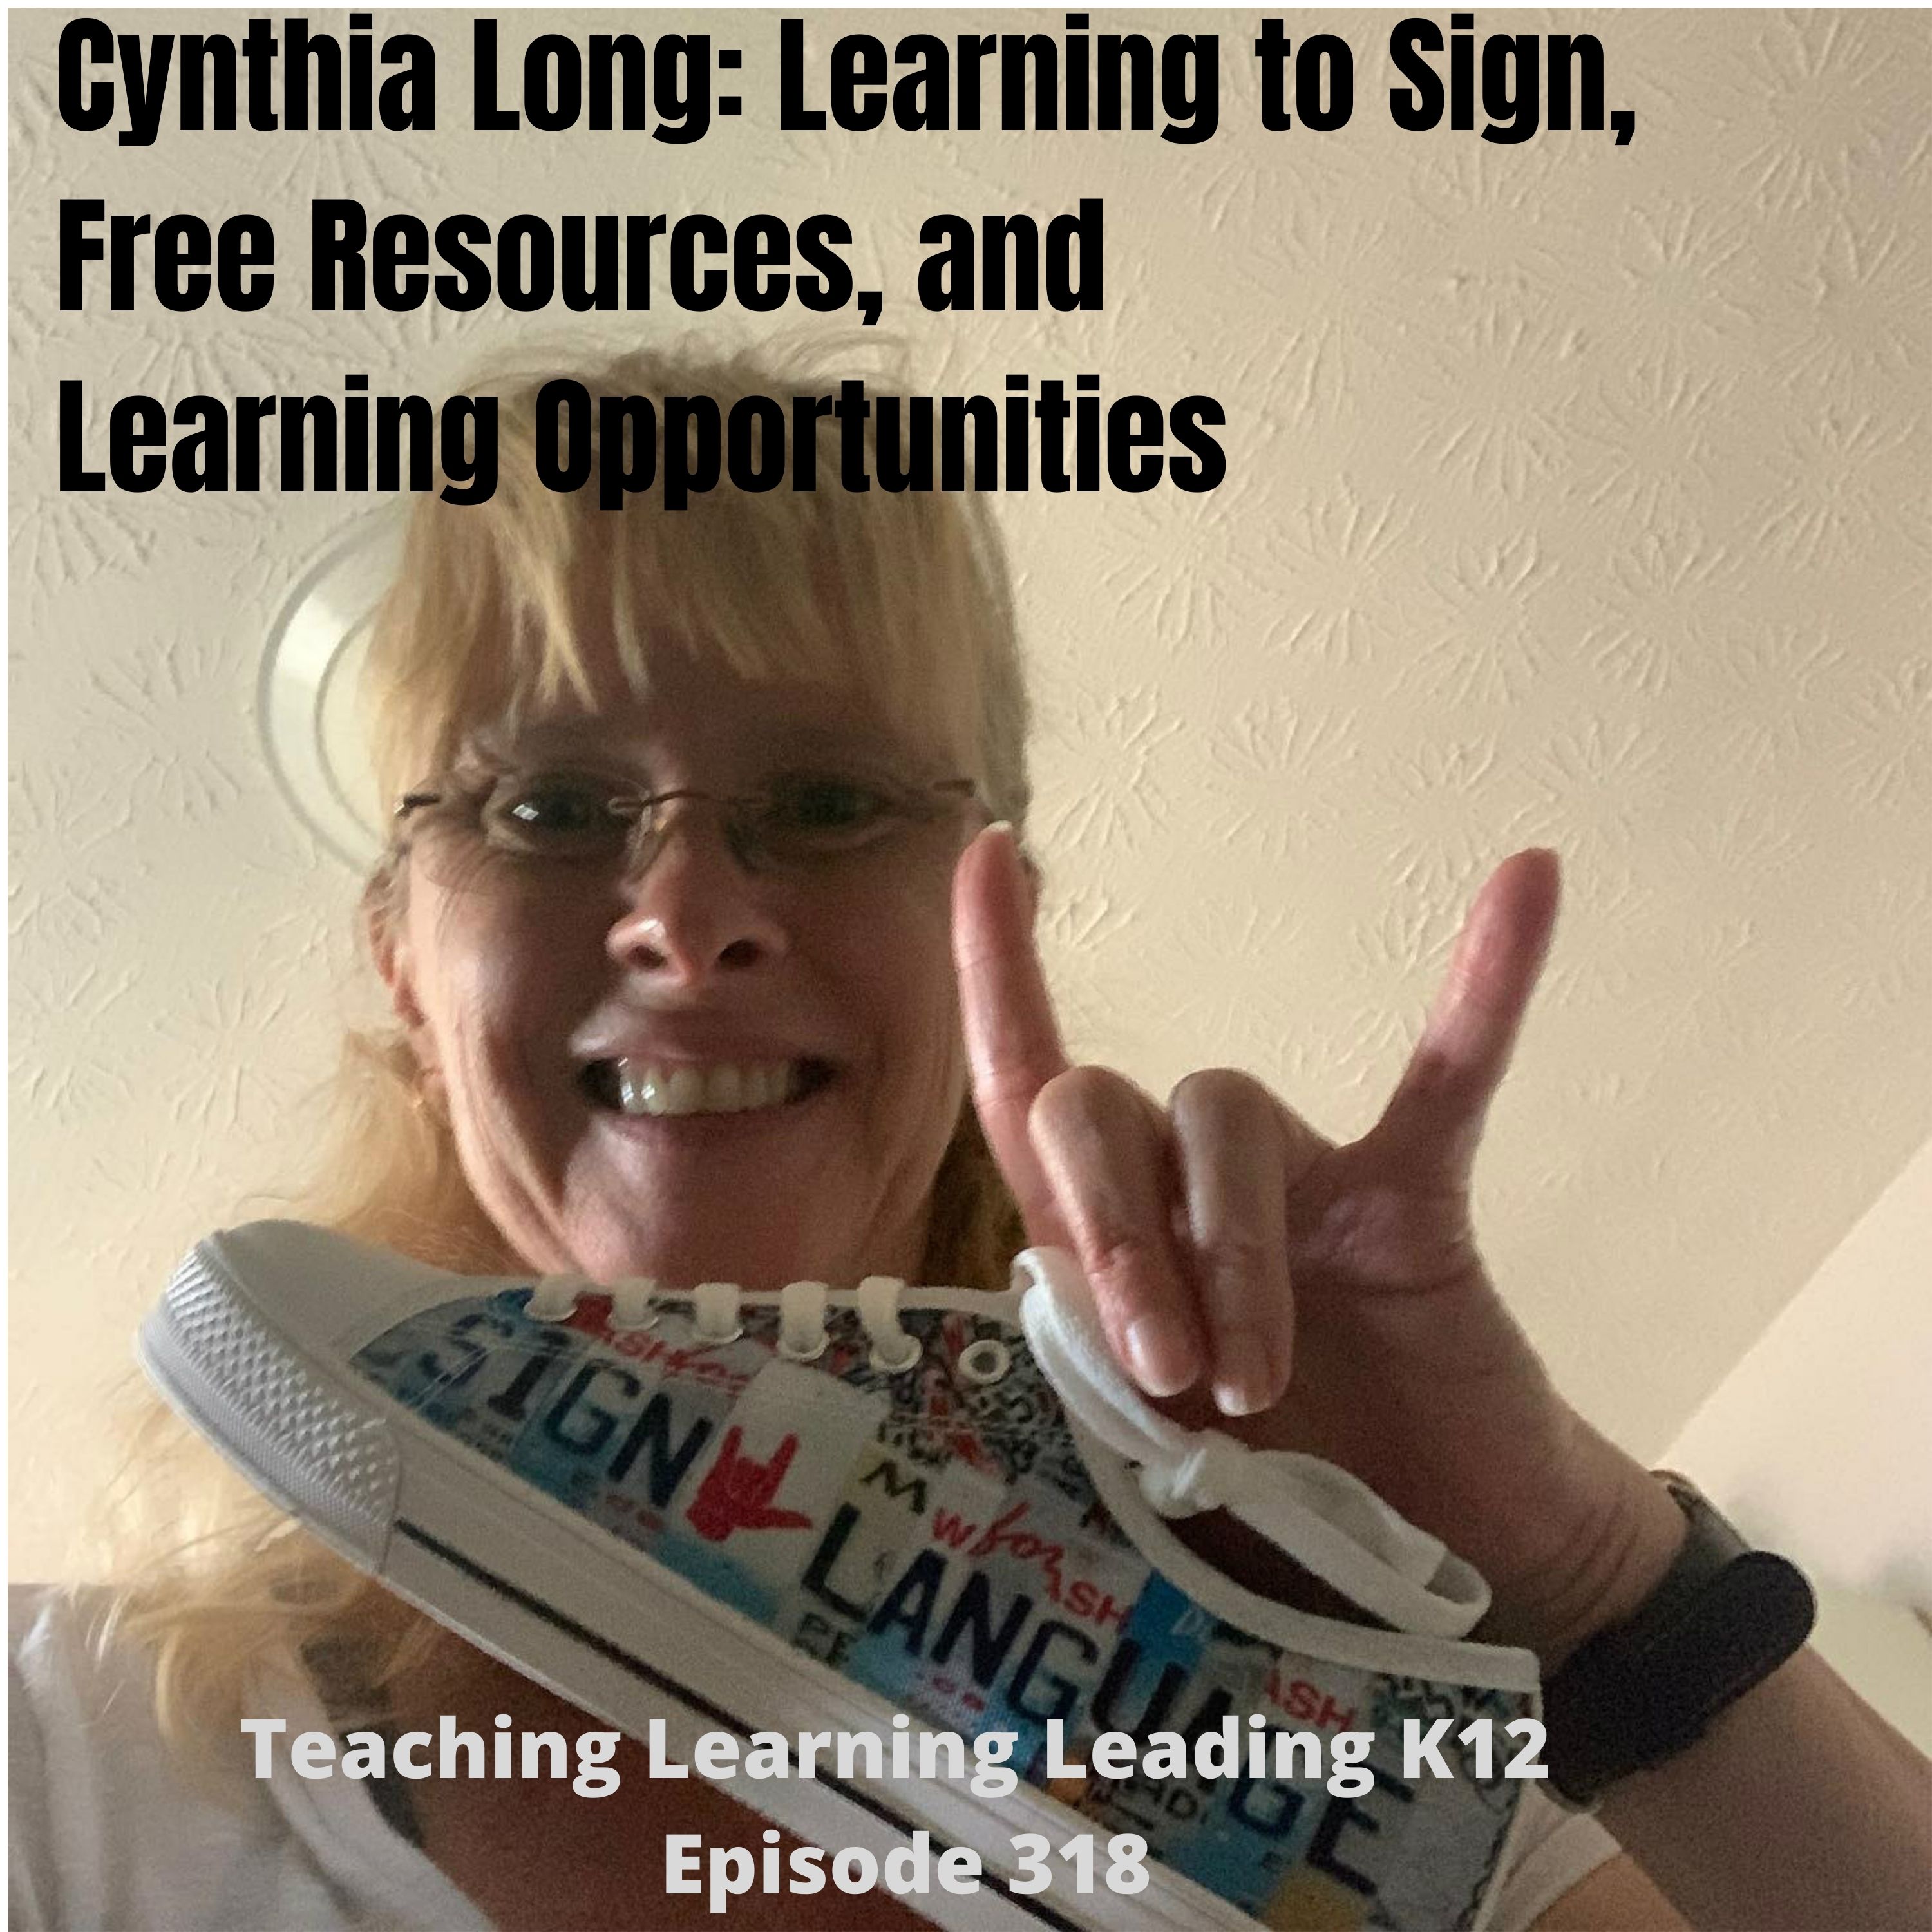 Cynthia Long: Learning to Sign, Free Resources, and Learning Opportunities - 318 Image